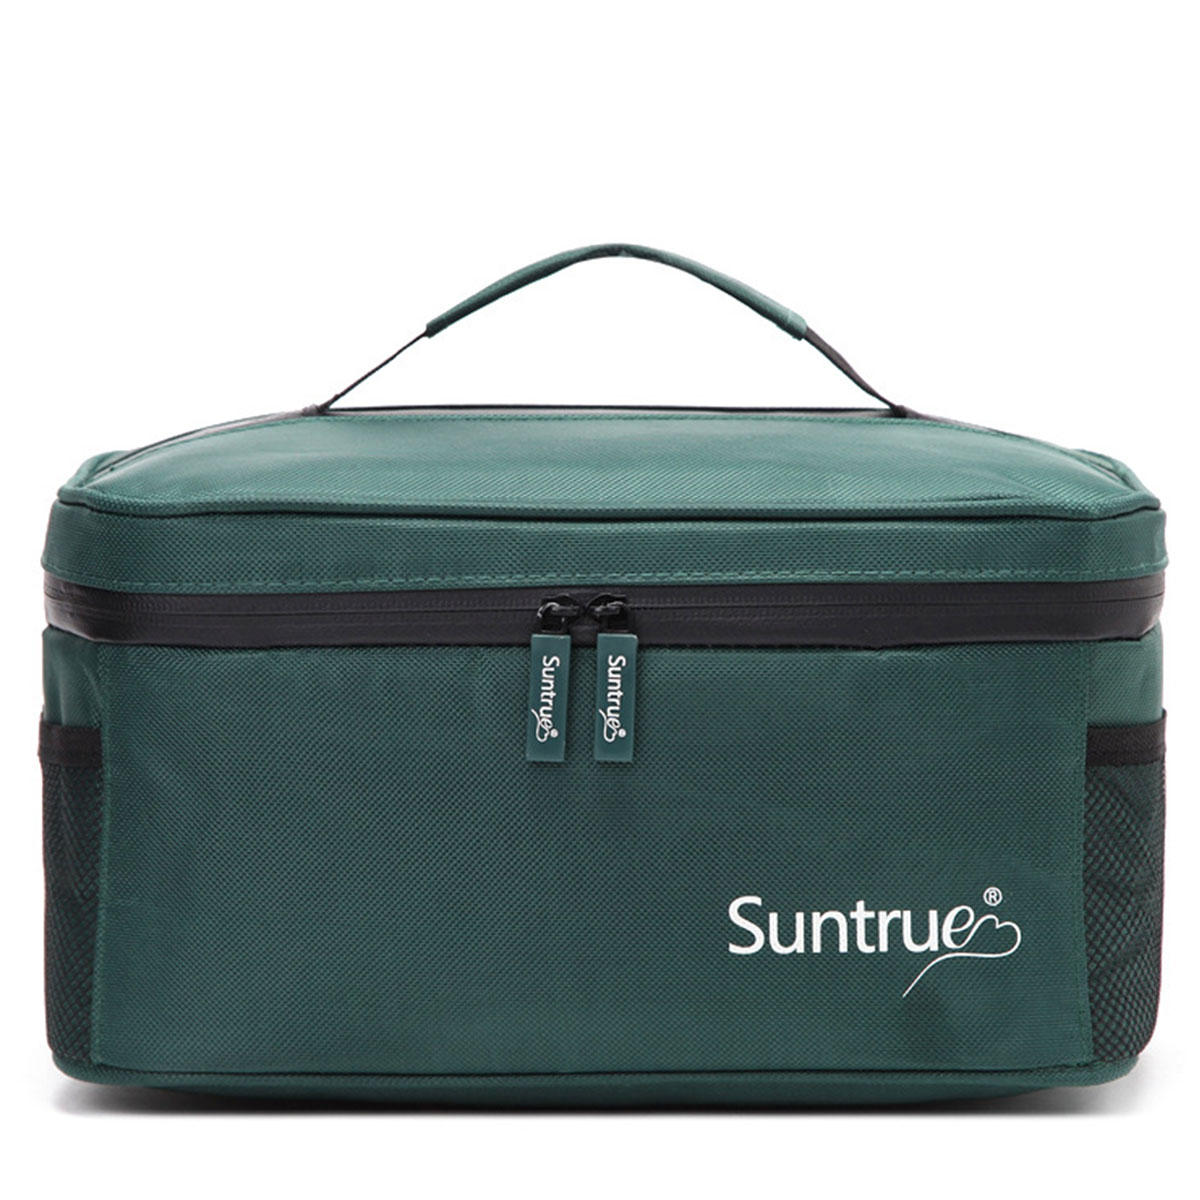 32x20.5x15cm Lunch Bag Portable Picnic Bag Waterproof Camping Food Pouch Container Storage Bag